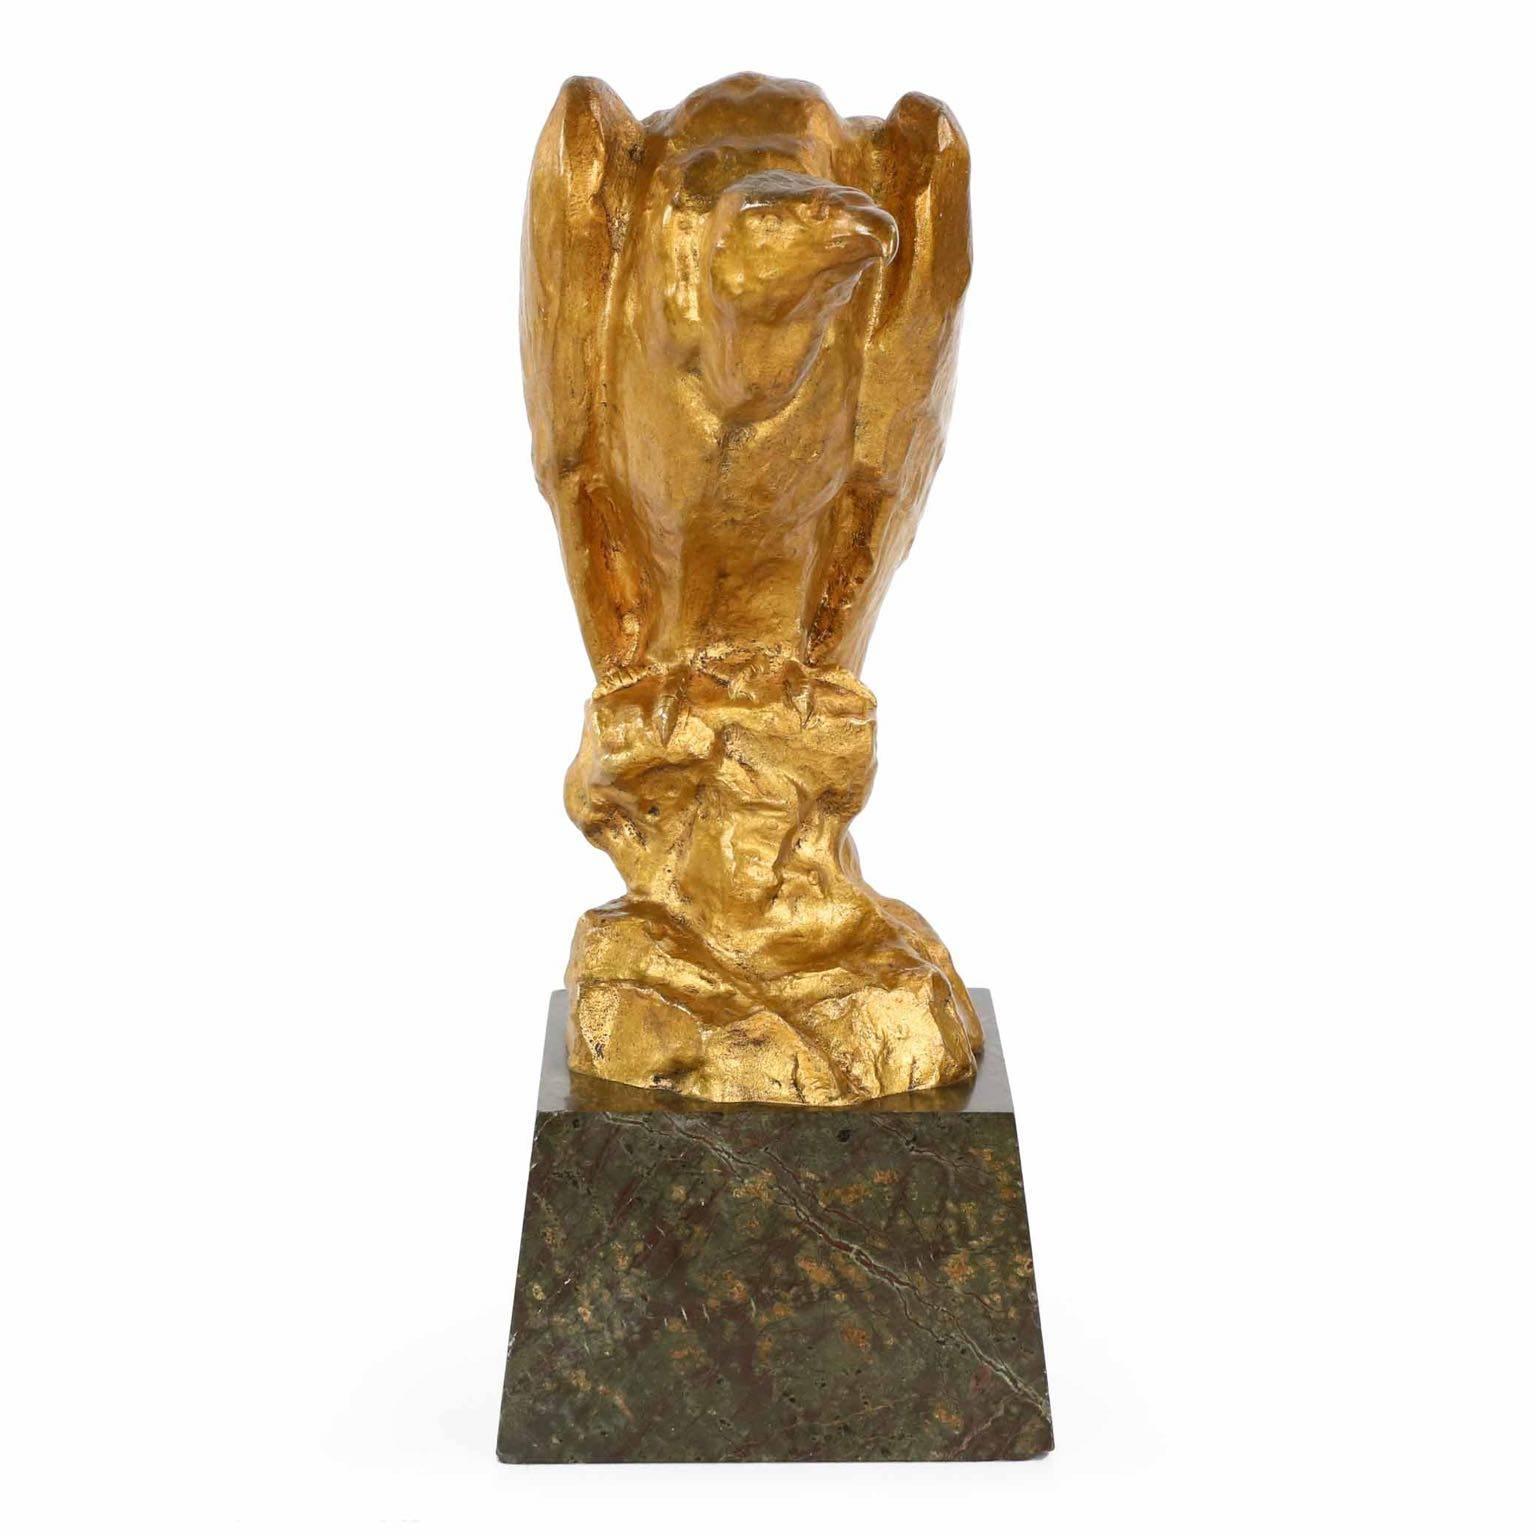 This rare and Fine gilded bronze sculpture of a prone Vulture is a striking work of impressionism, loosely capturing the essence of the bird with mottled features against a brilliant golden patinated surface. The high burnish of wax against smooth